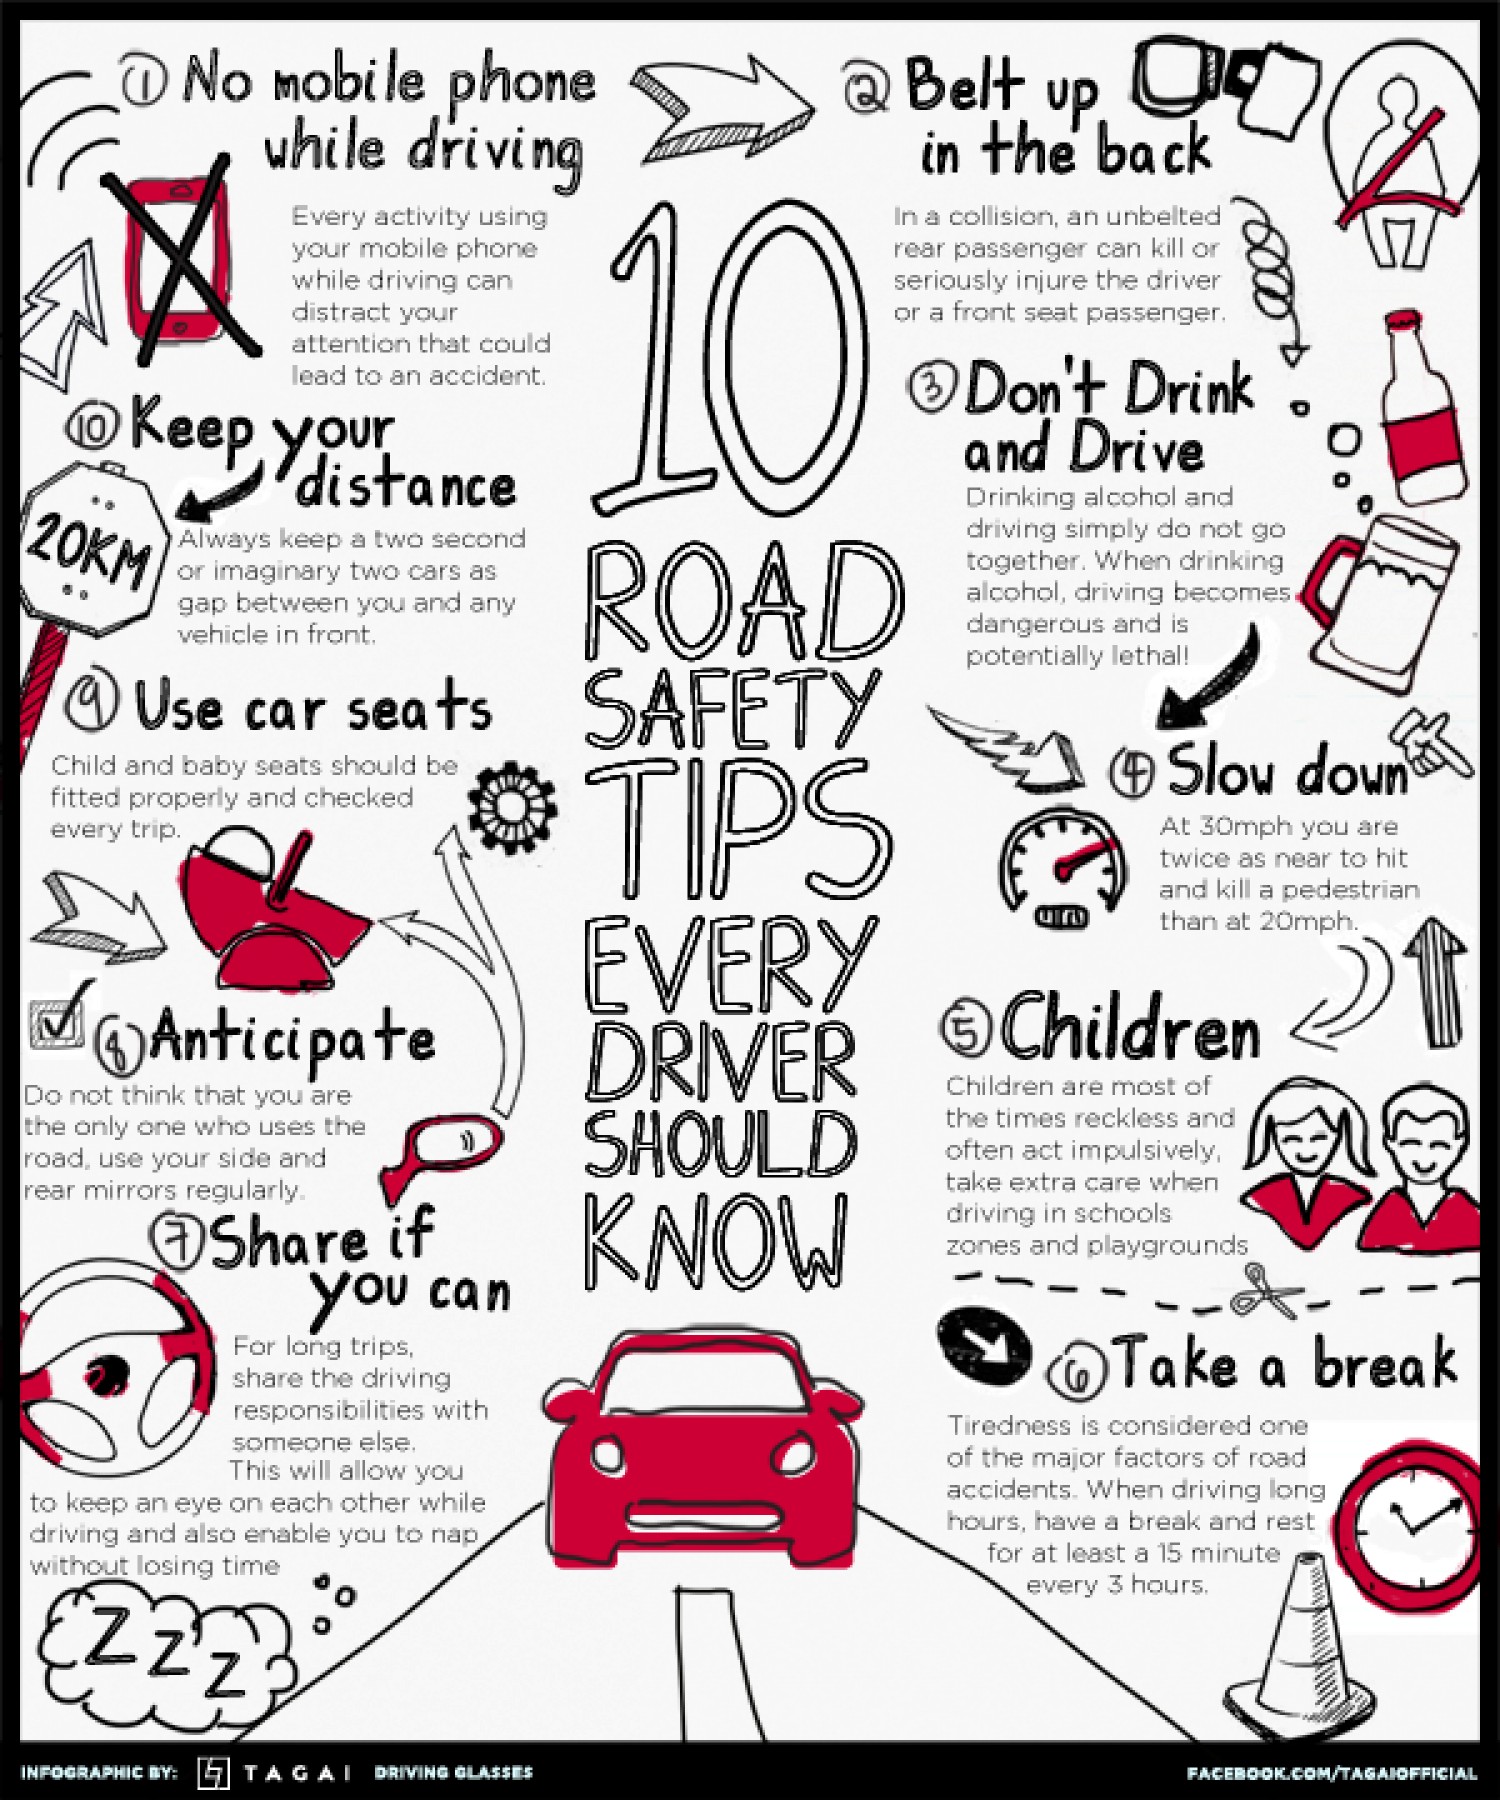 TenRoadSafetyTipsEveryDriverShouldKnow_5305d0db45d8f_w1500.png